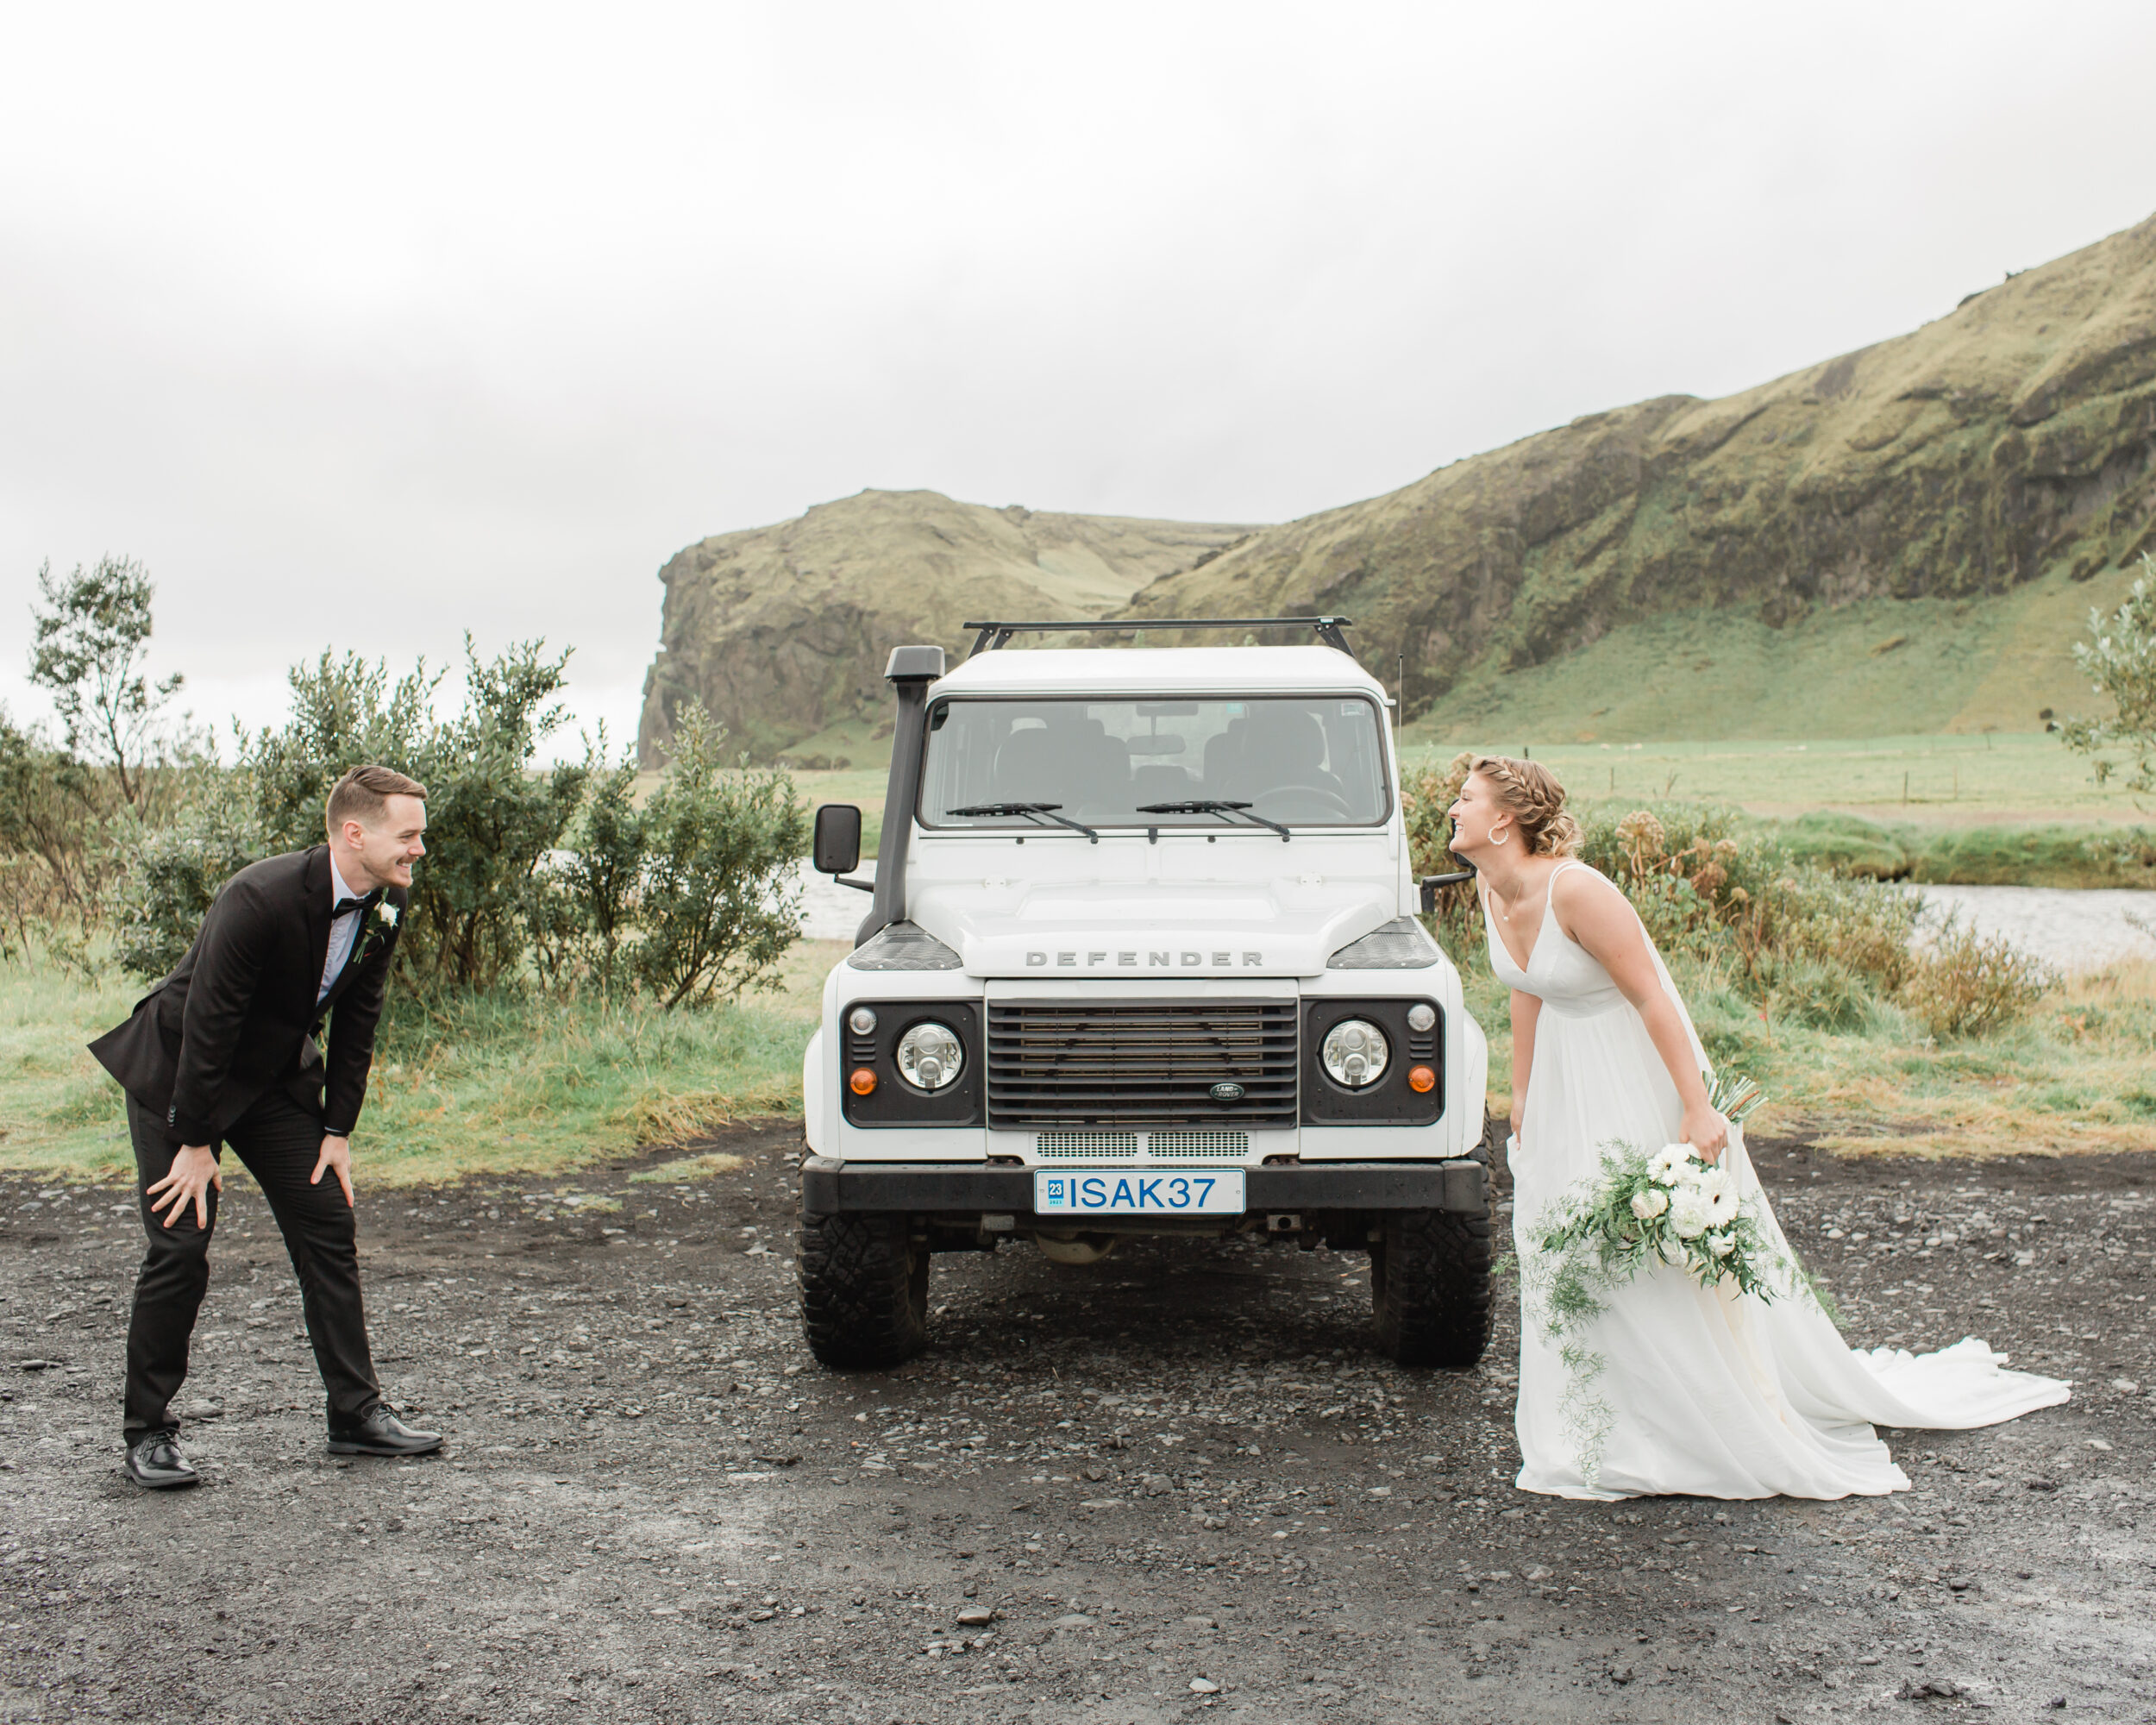 A couple celebrates their first look in front of a Defender in Iceland.